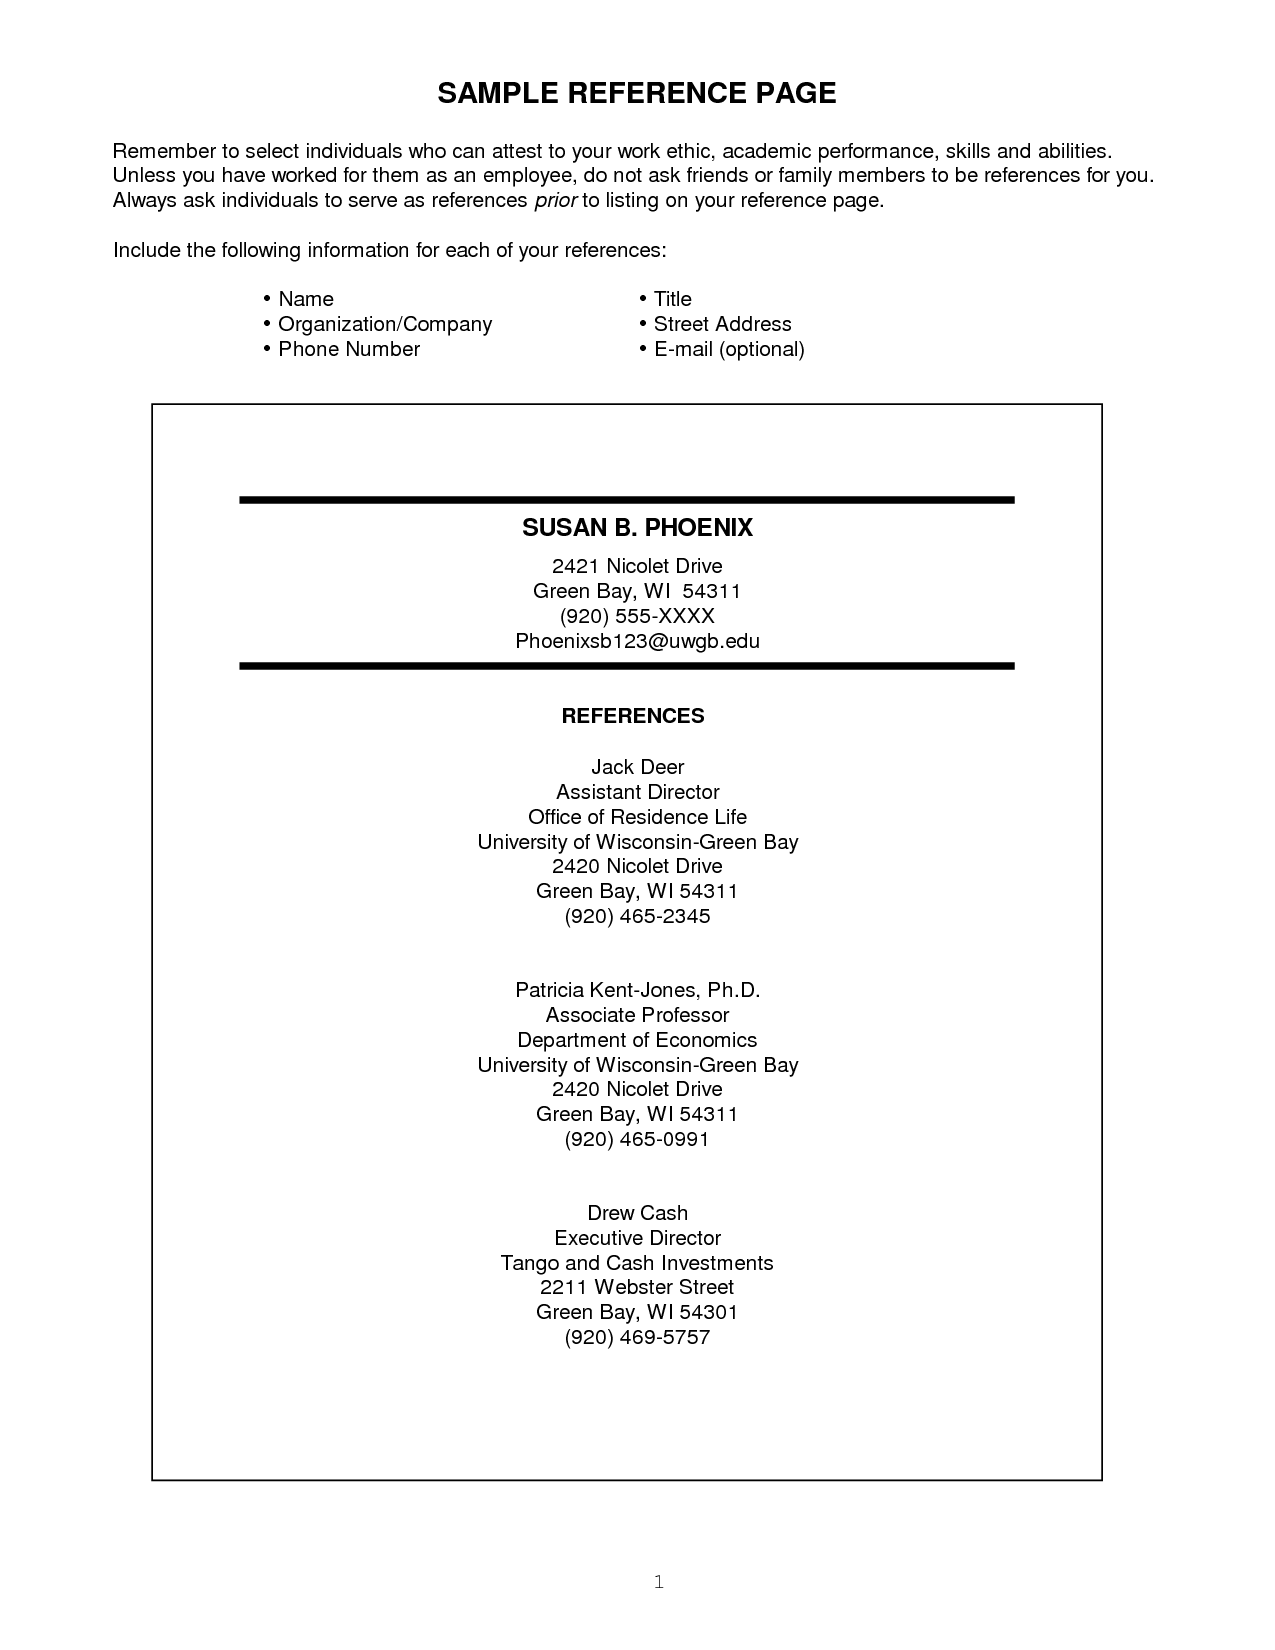 Resume Examples With References 